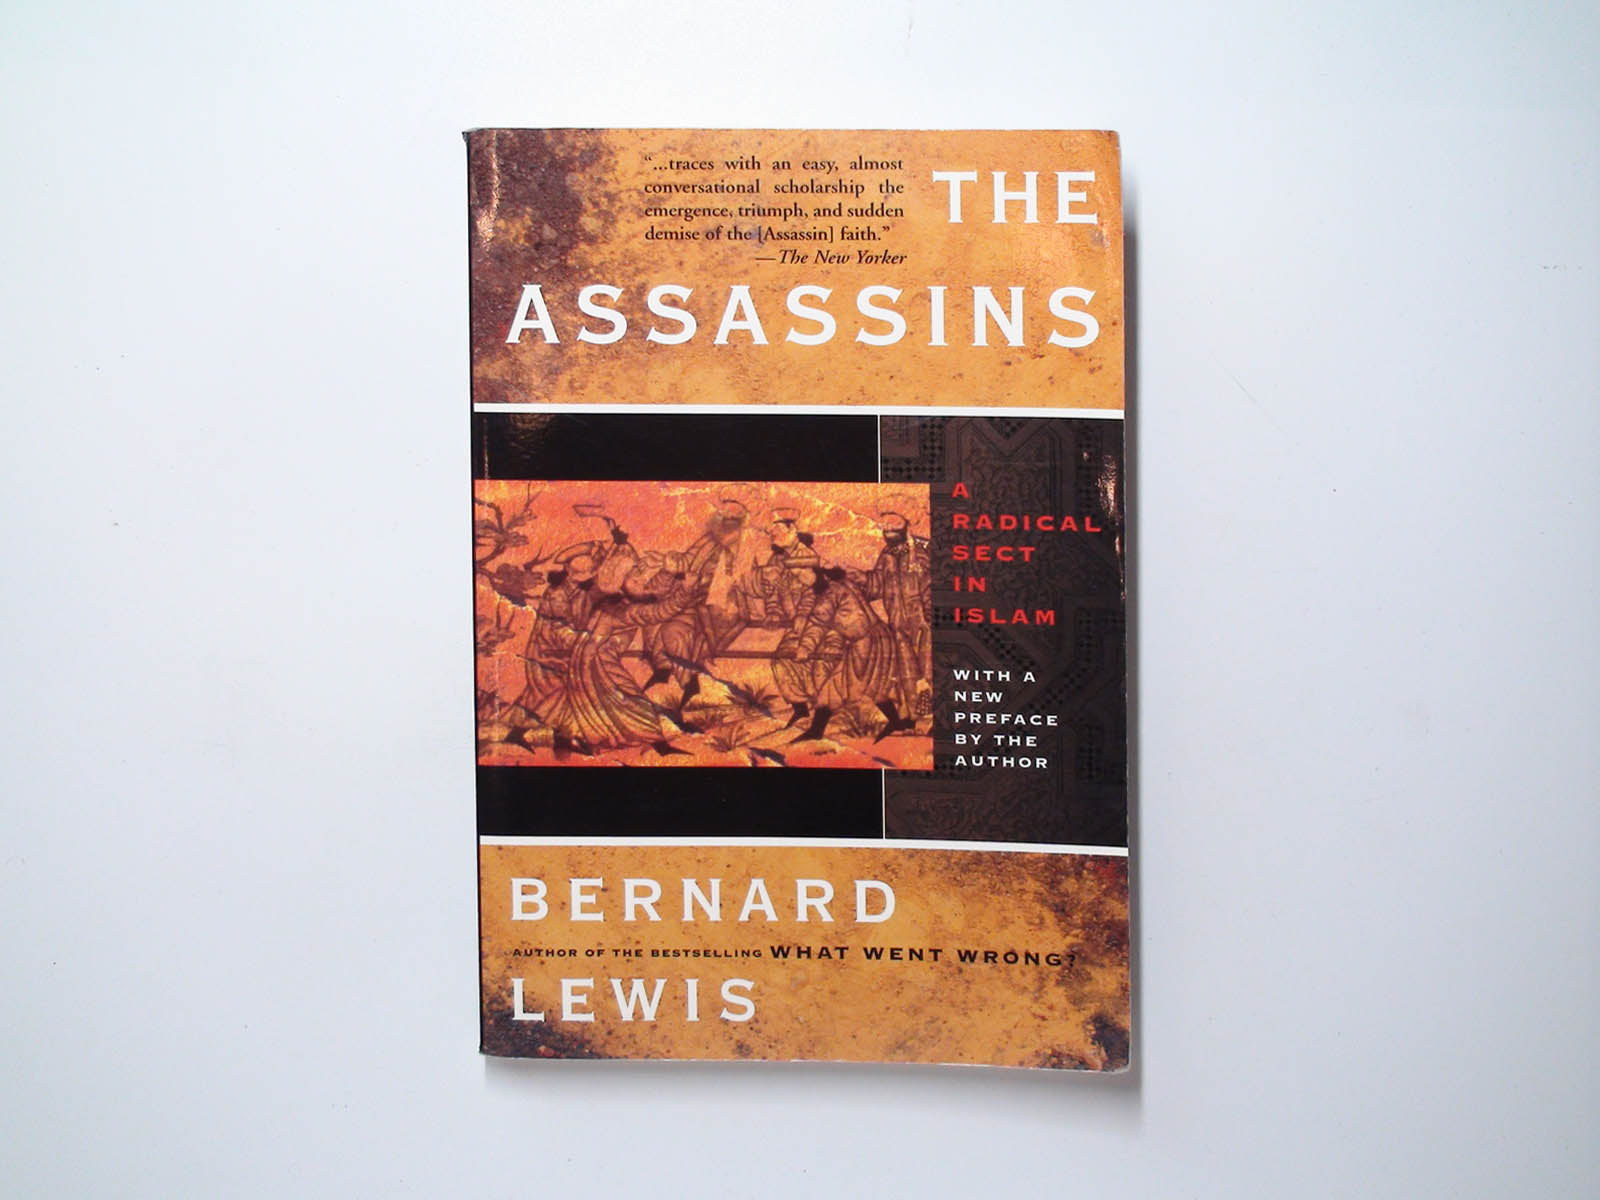 The Assassins, A Radical Sect in Islam by Bernard Lewis, Paperback, 2003